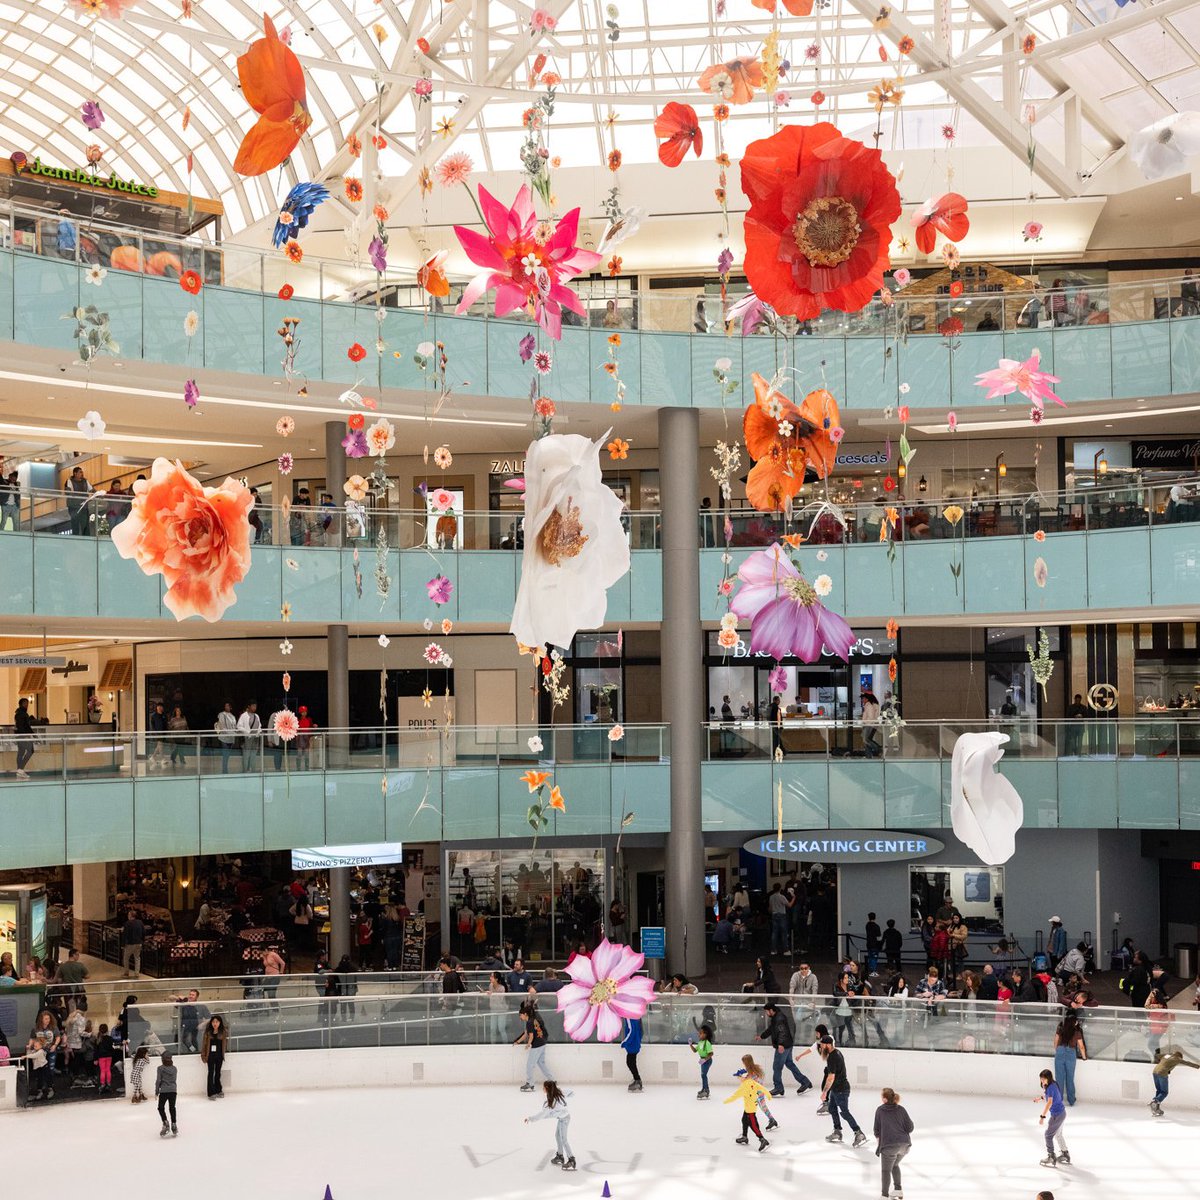 Spring has sprung at #GalleriaDallas.🌸 Our cascading garden of over 375 blooms is on display over our ice skating rink now through May 22nd! #iceskating #spring #flowers #DallasTX